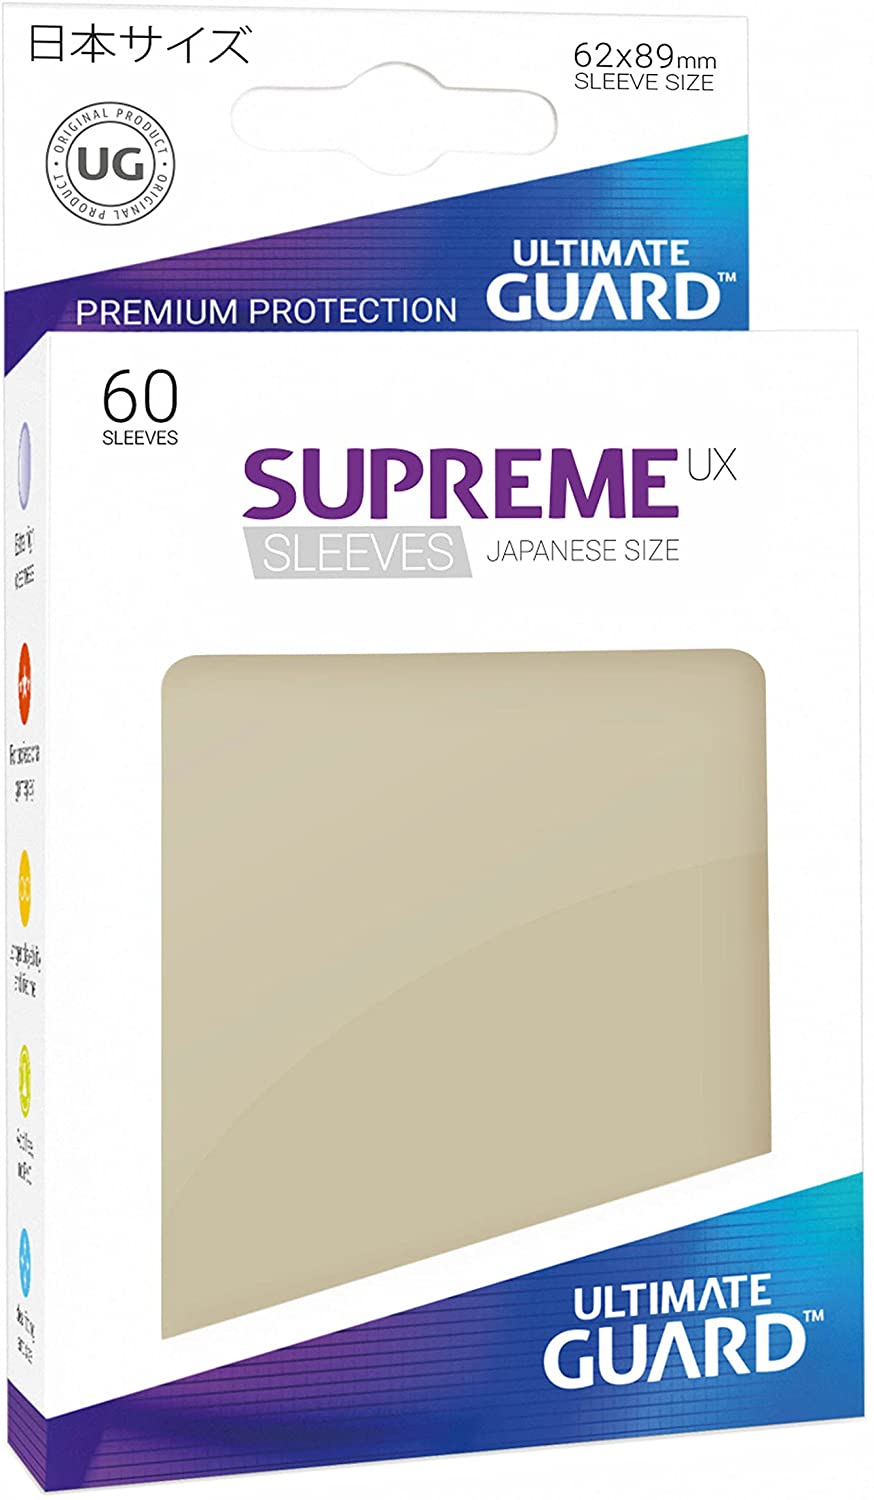 Ultimate Guard Supreme Ux Sleeves Japanese Size Light Sand (60)